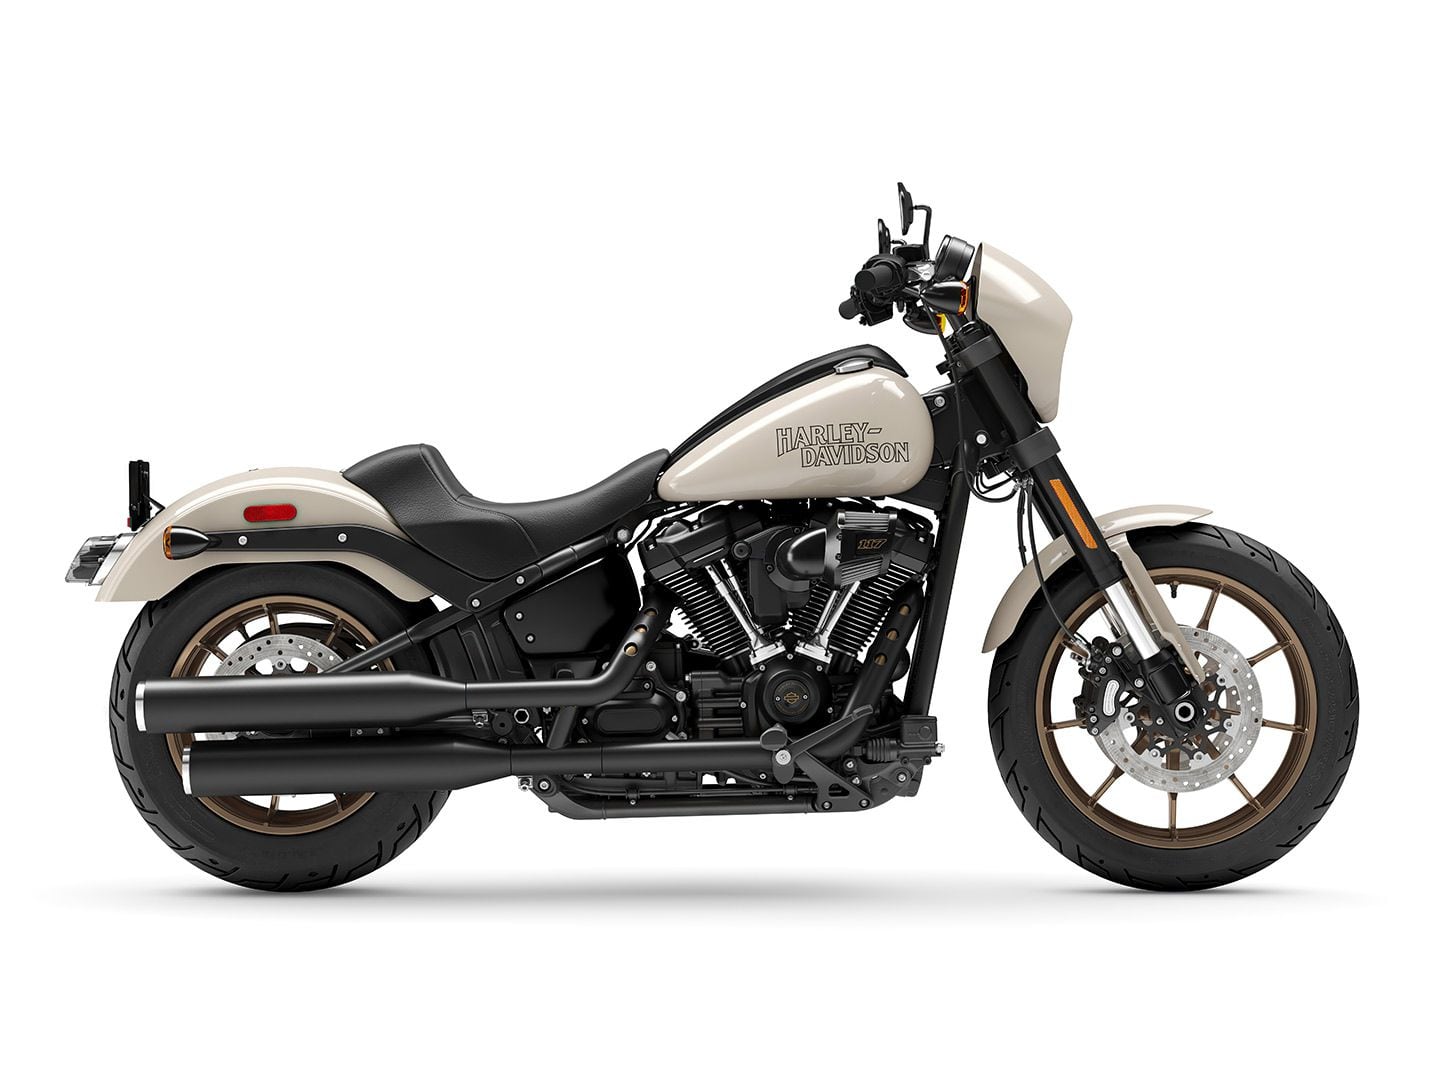 The Low Rider S is Harley's performance cruiser with a classic style for the lone-wolf rider.